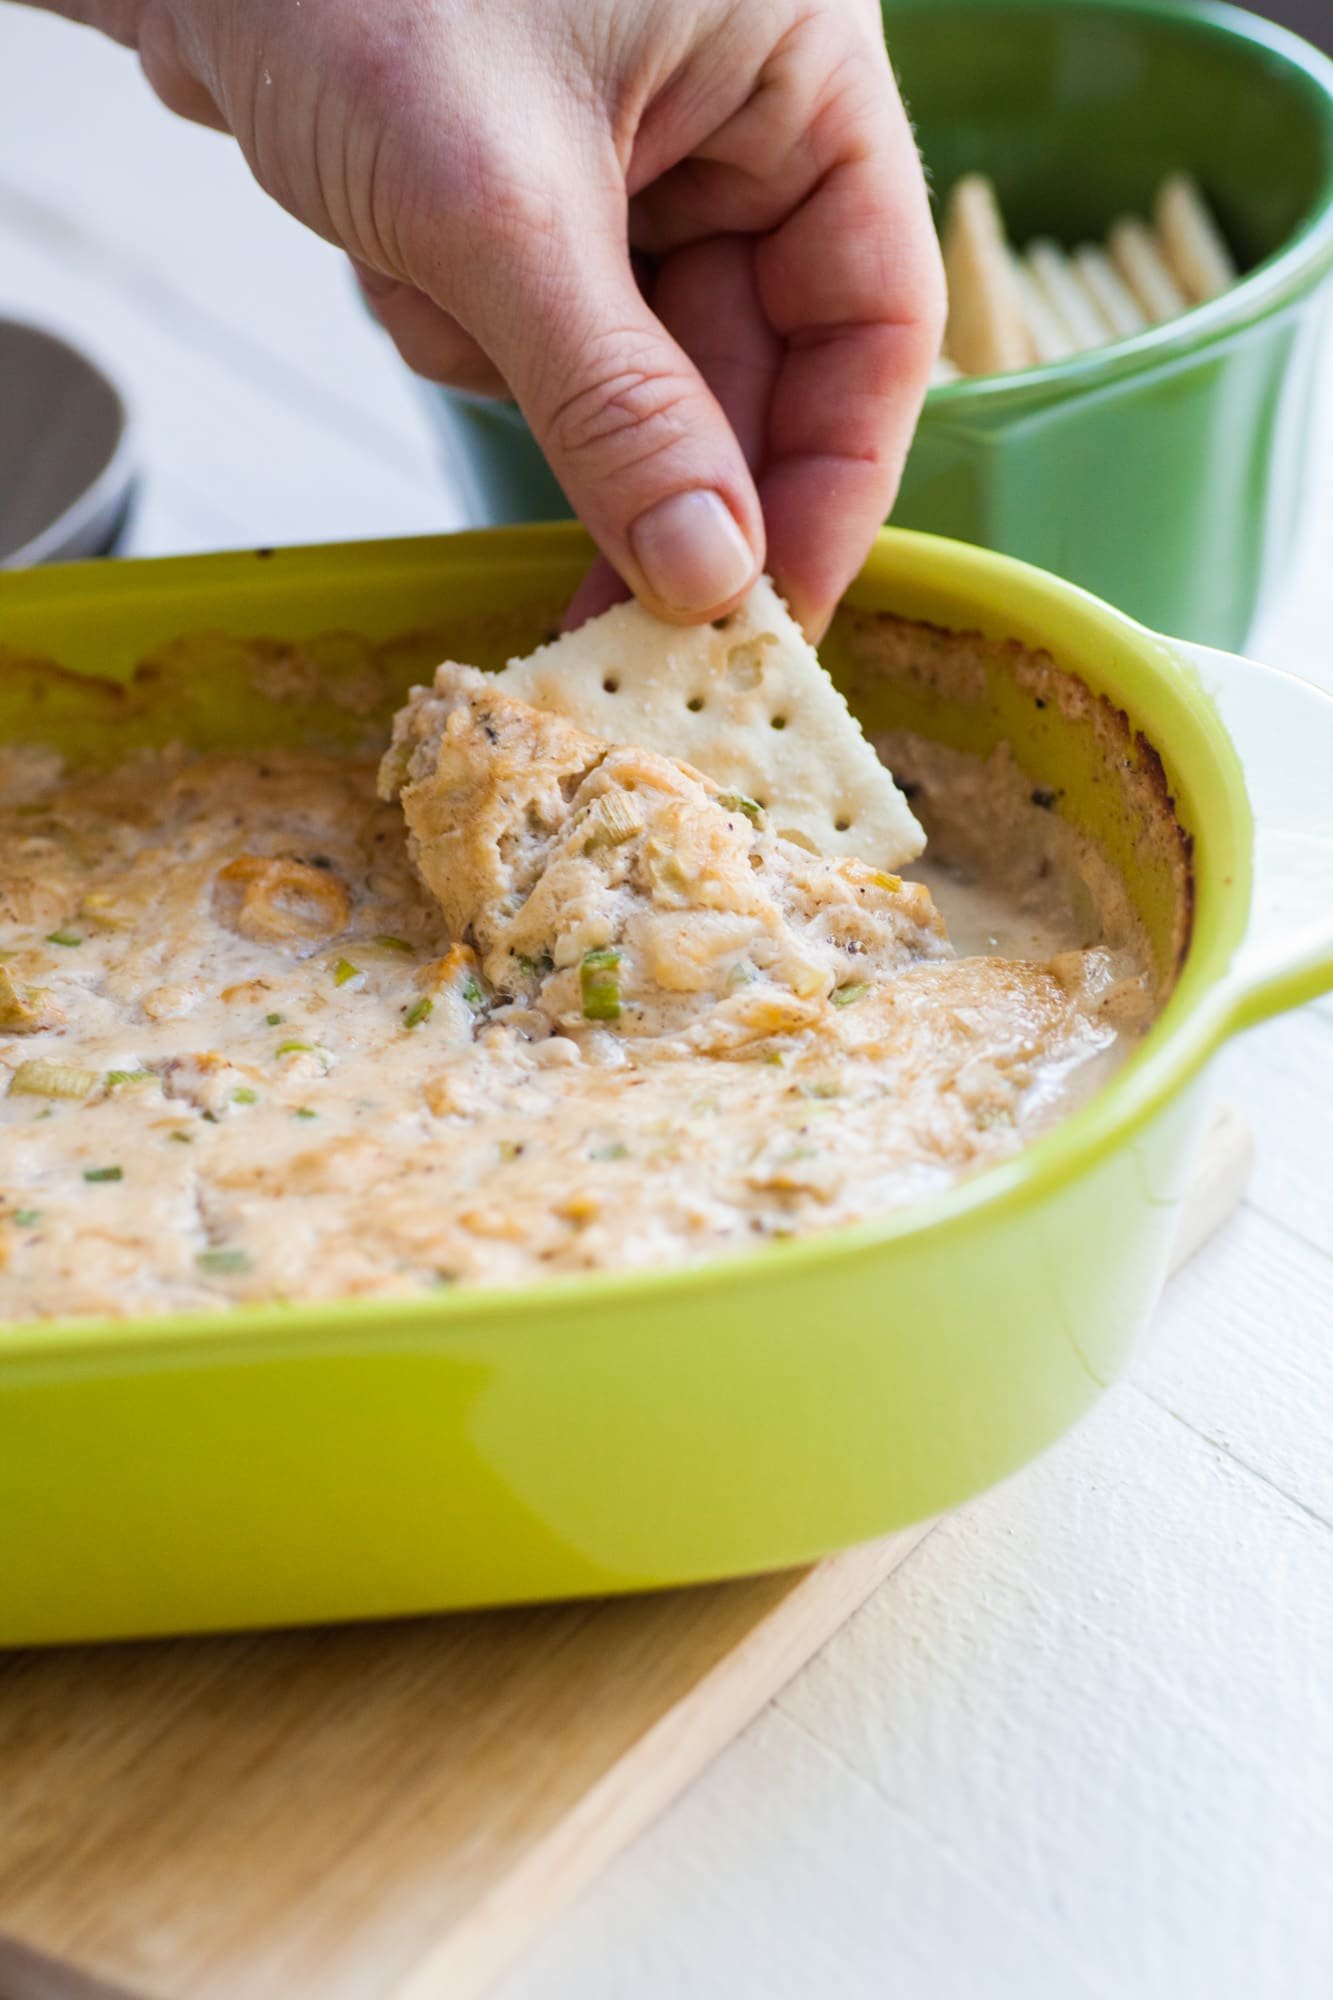 Woman dipping saltine into a serving dish of hot clam dip.